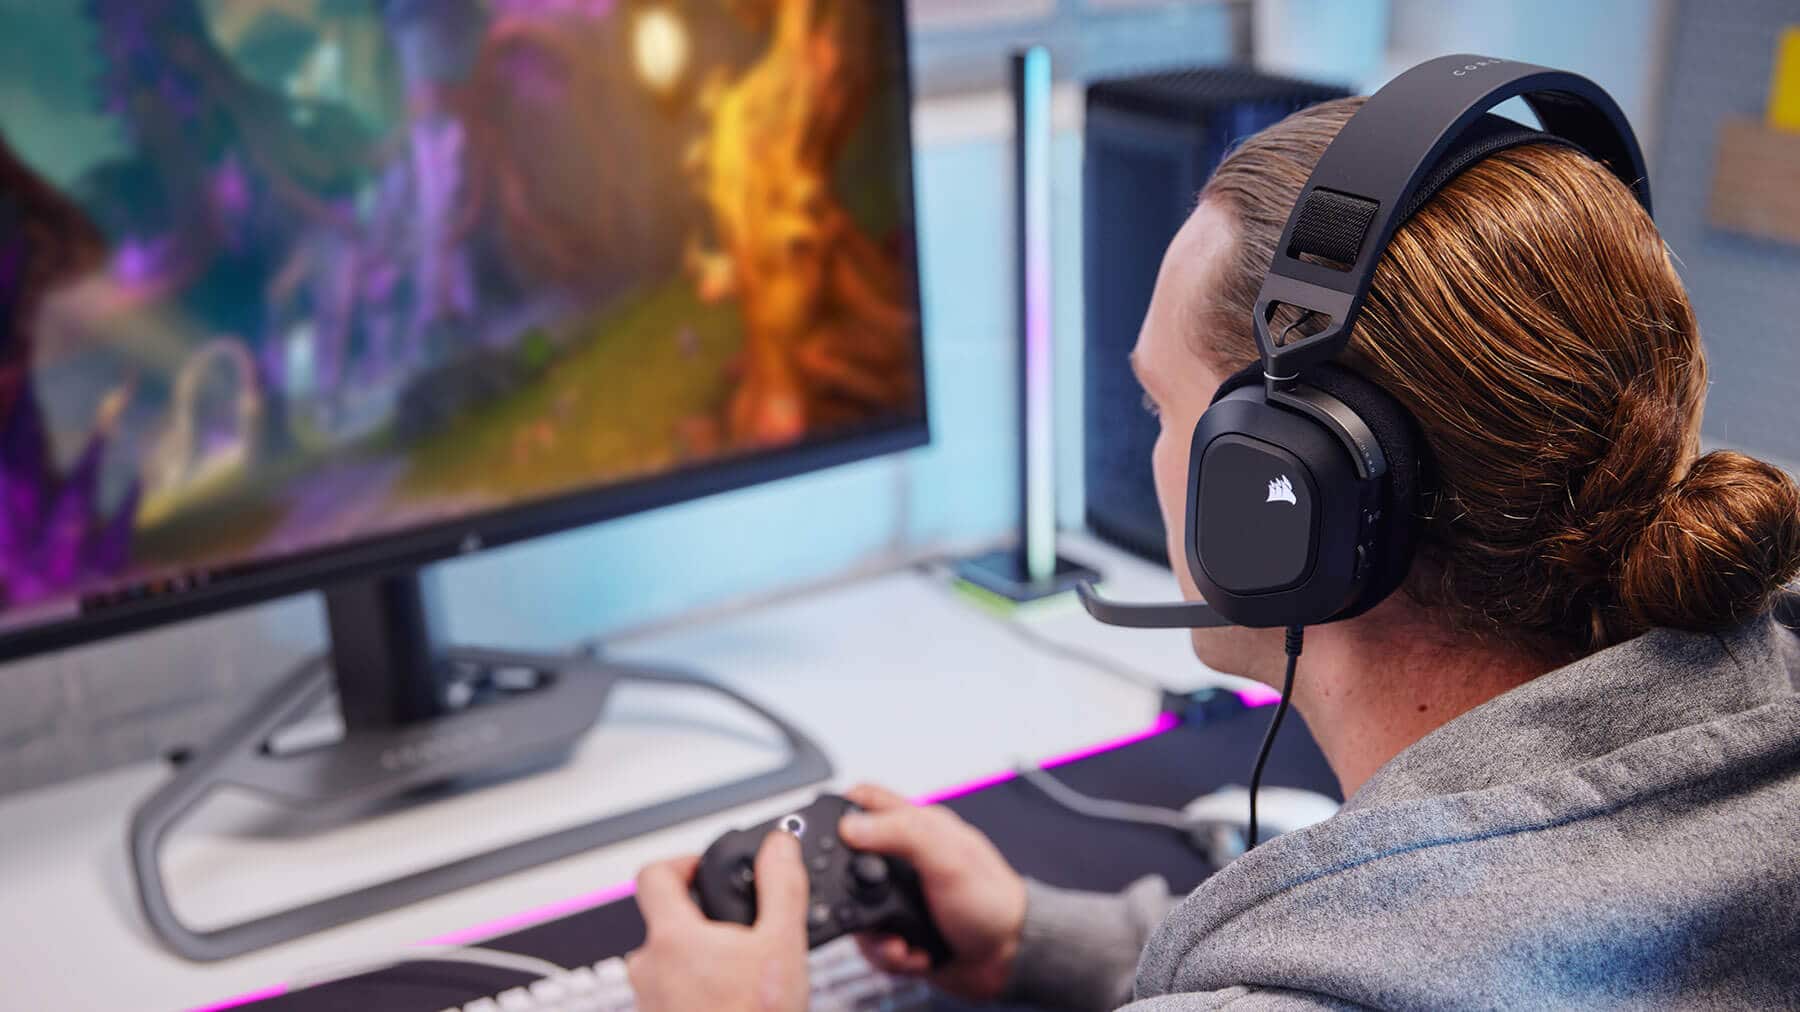 Man playing PC games while using the HS80 RGB USB Gaming Headset.